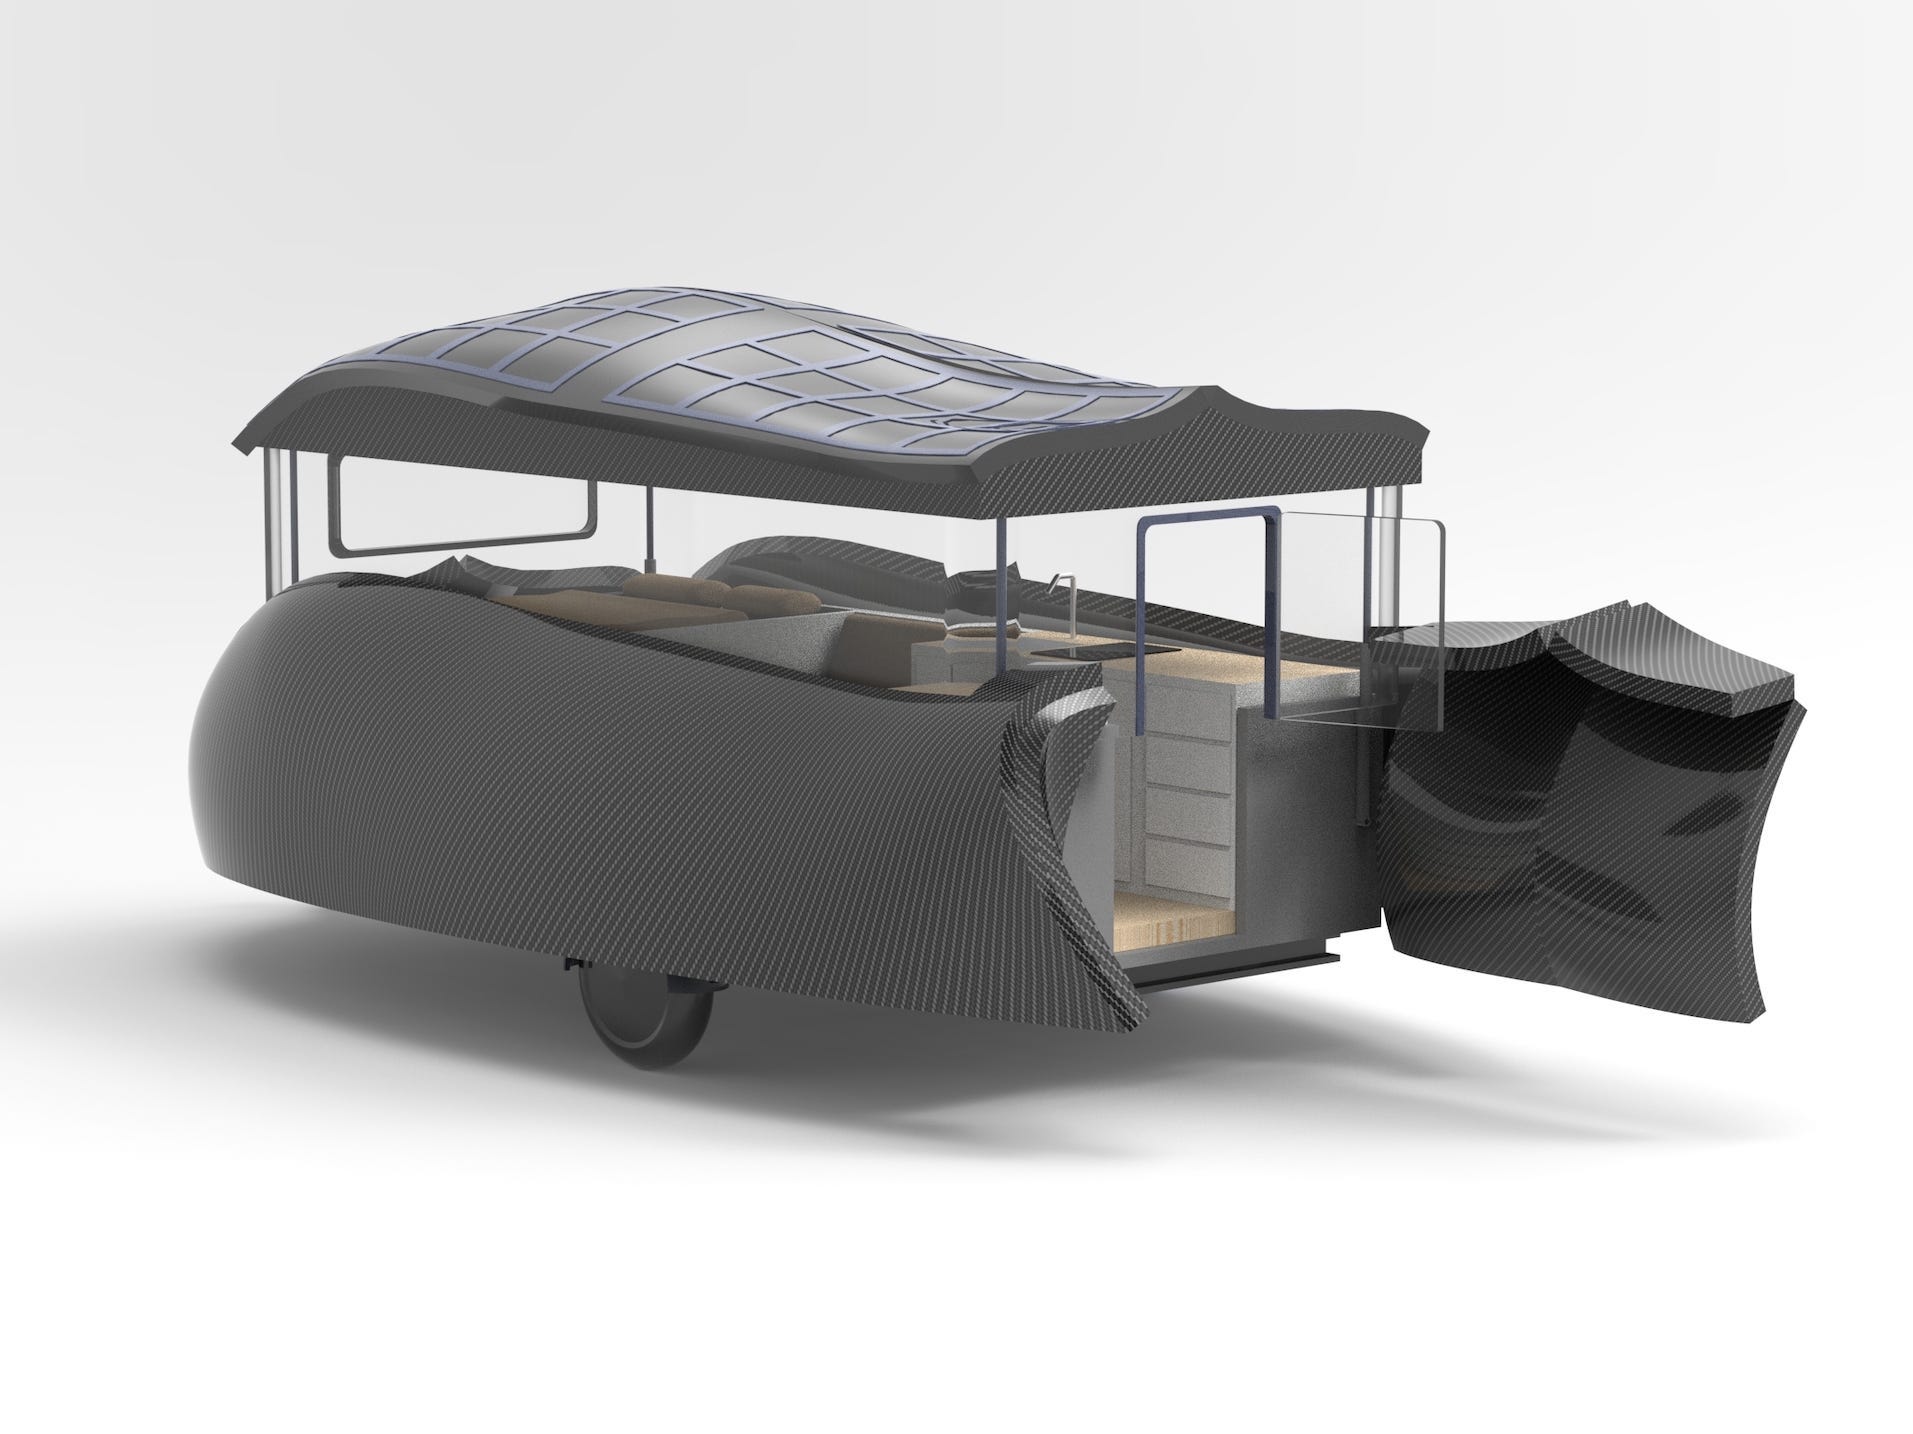 A rendering of Grounded's upcoming towable RV.